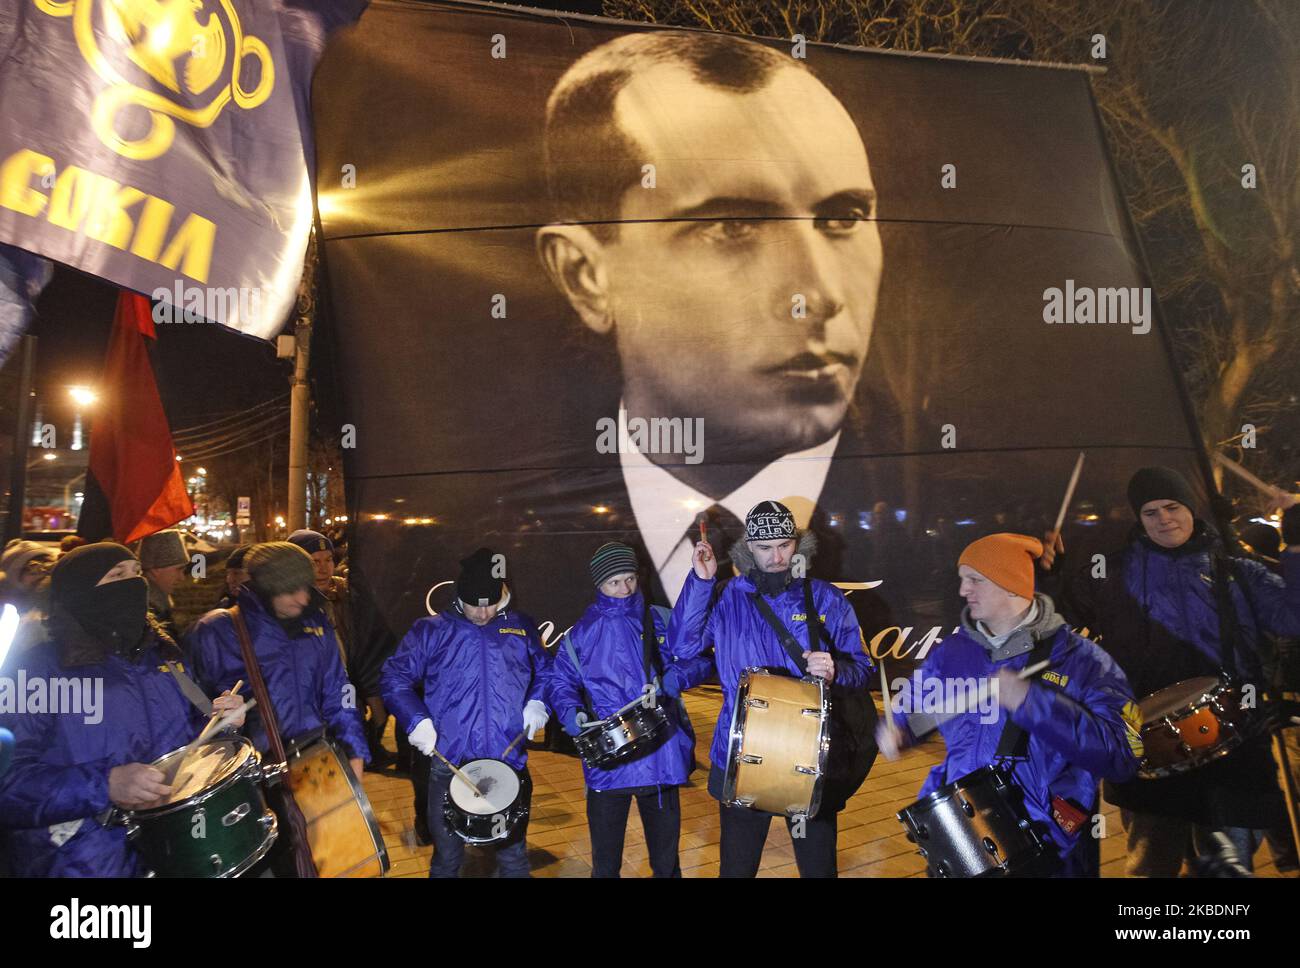 Drummers stand nexto to a banner with Stepan Bandera portrait during a torchlight procession dedicated to the 111th of Stepan Bandera birthday in center of Kyiv, Ukraine, on 1 January 2020. Members and supporters of 'Svoboda' ('Freedom') nationalistic party attended the torch march to mark leader and ideologist of Ukrainian national movement Stepan Bandera birthday. (Photo by STR/NurPhoto) Stock Photo